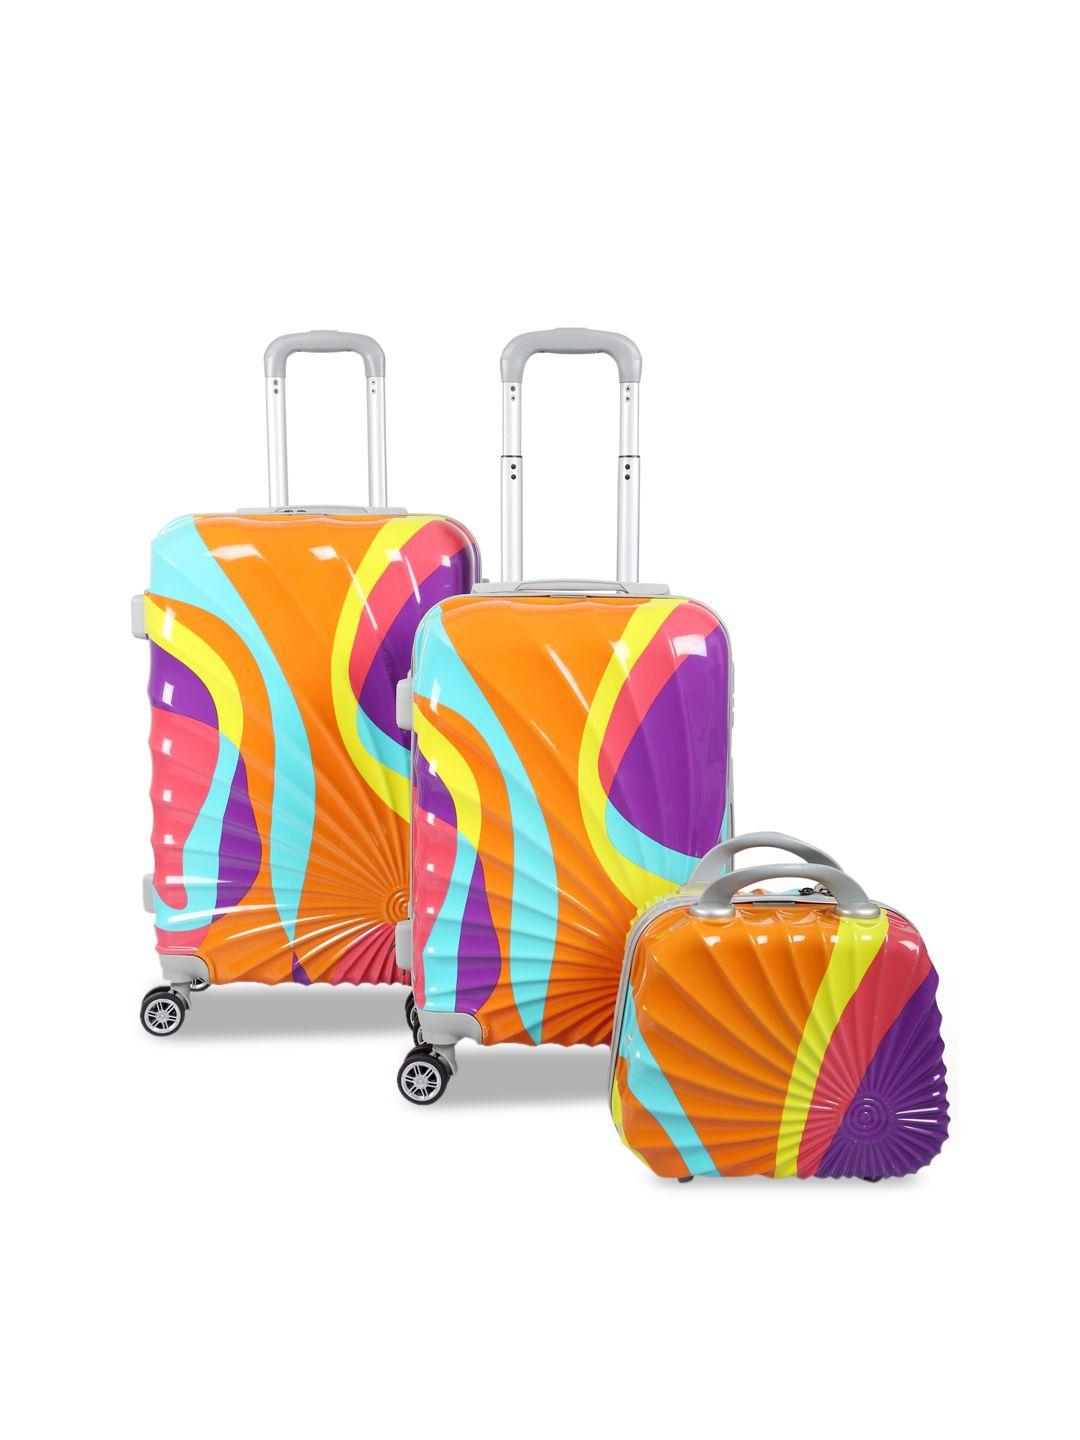 polo class unisex set of 3 multicoloured printed travel bags